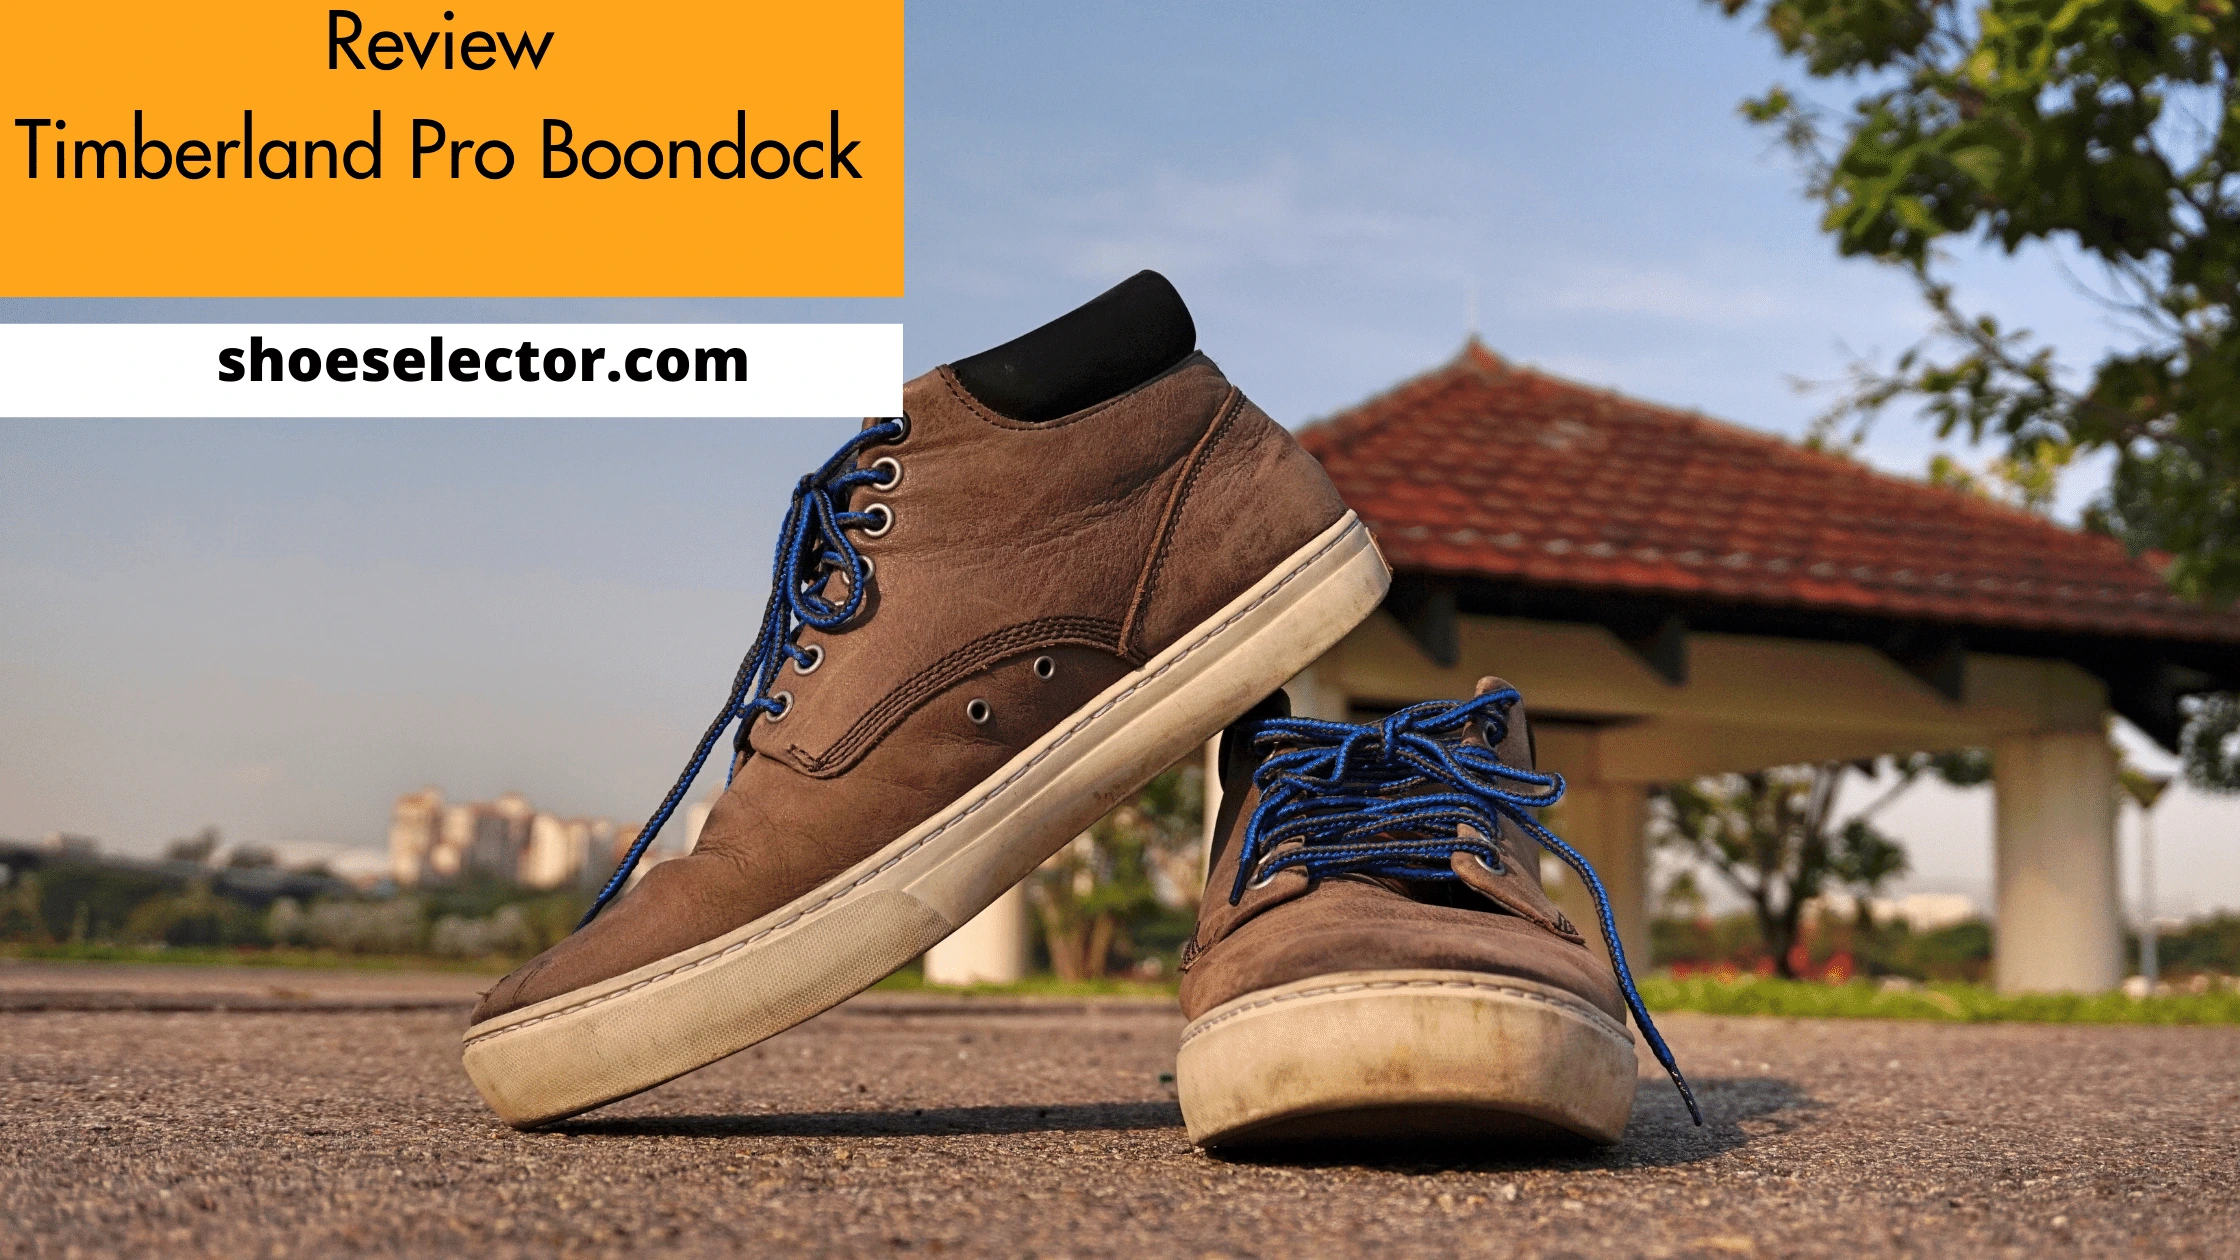 Timberland Pro Boondock Review - Latest Guide